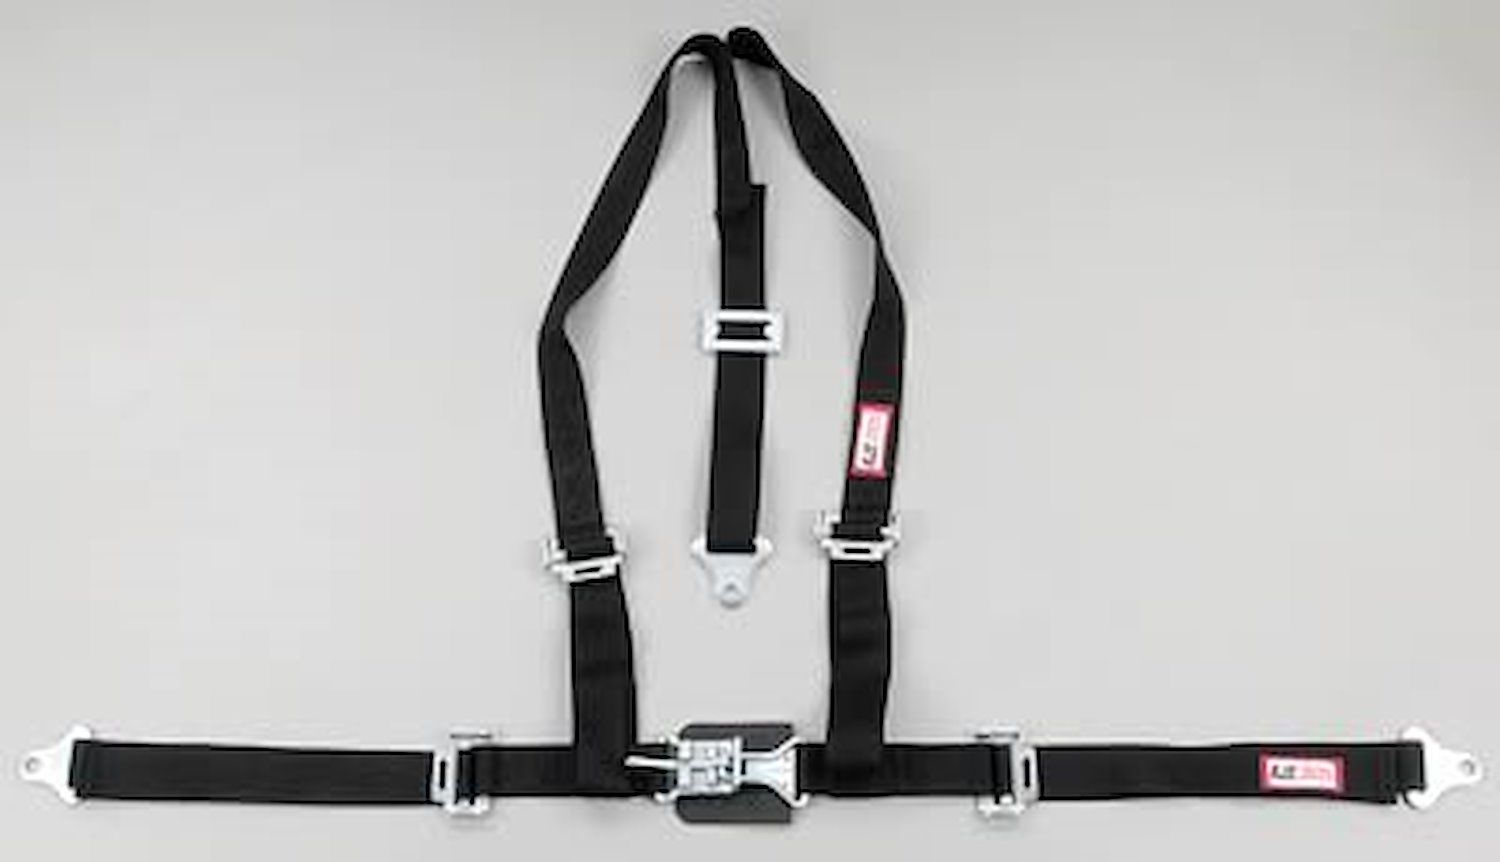 NON-SFI L&L HARNESS 2 PULL UP Lap Belt SNAP SEWN IN 2 S.H. INDIVIDUAL FLOOR Mount w/STERNUM STRAP WRAP/SNAP BLUE